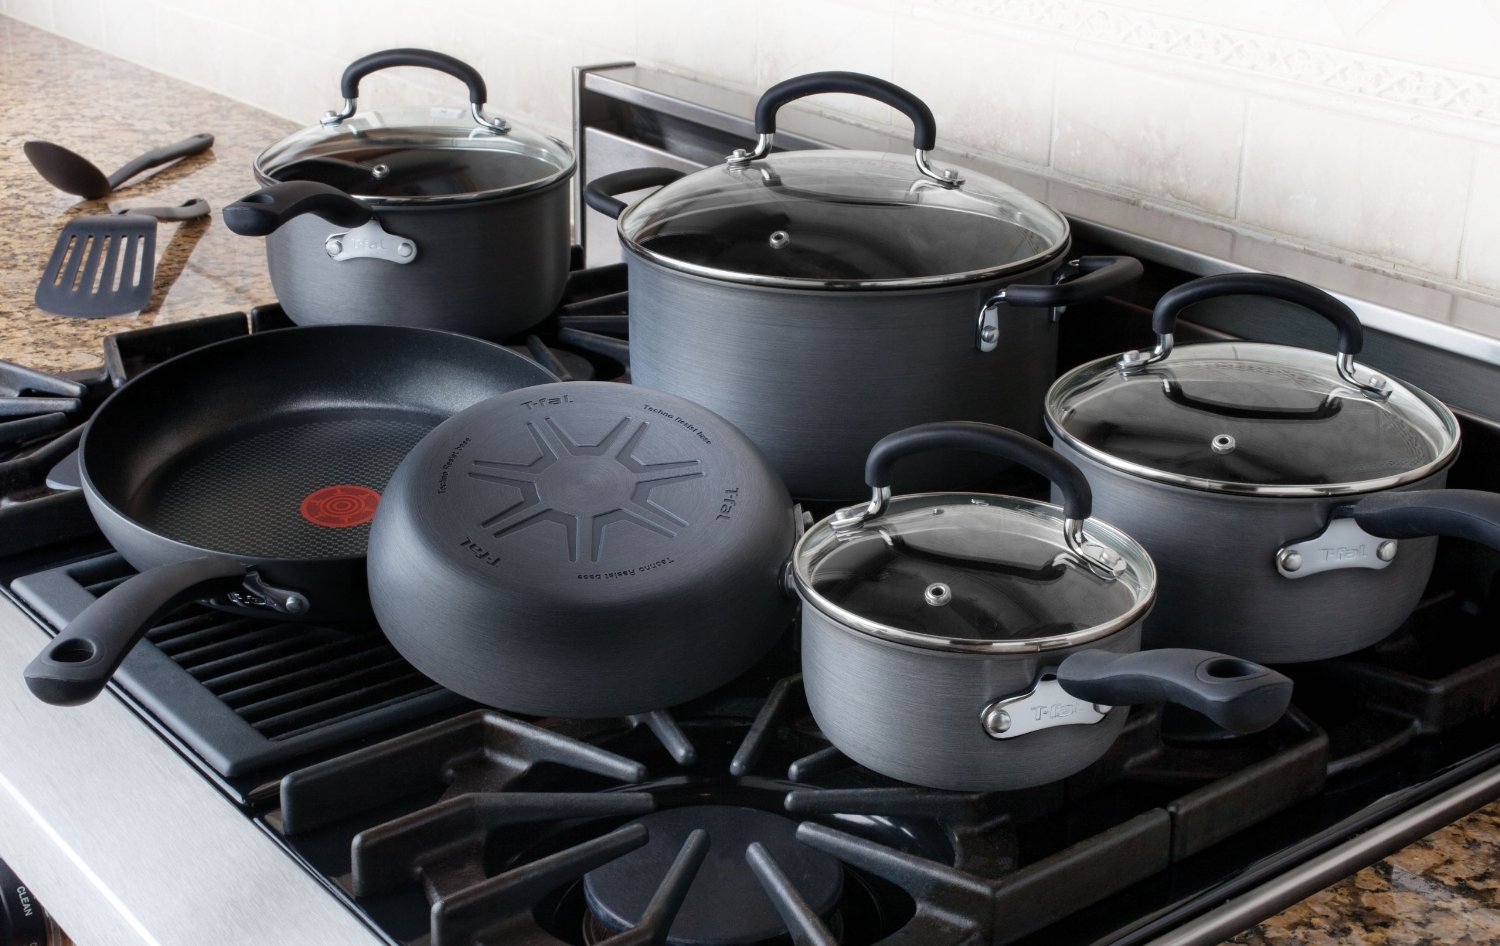 https://9to5toys.com/wp-content/uploads/sites/5/2015/05/12-piece-t-fal-ultimate-hard-anodized-nonstick-expert-interior-cookware-set-sale-01.jpg